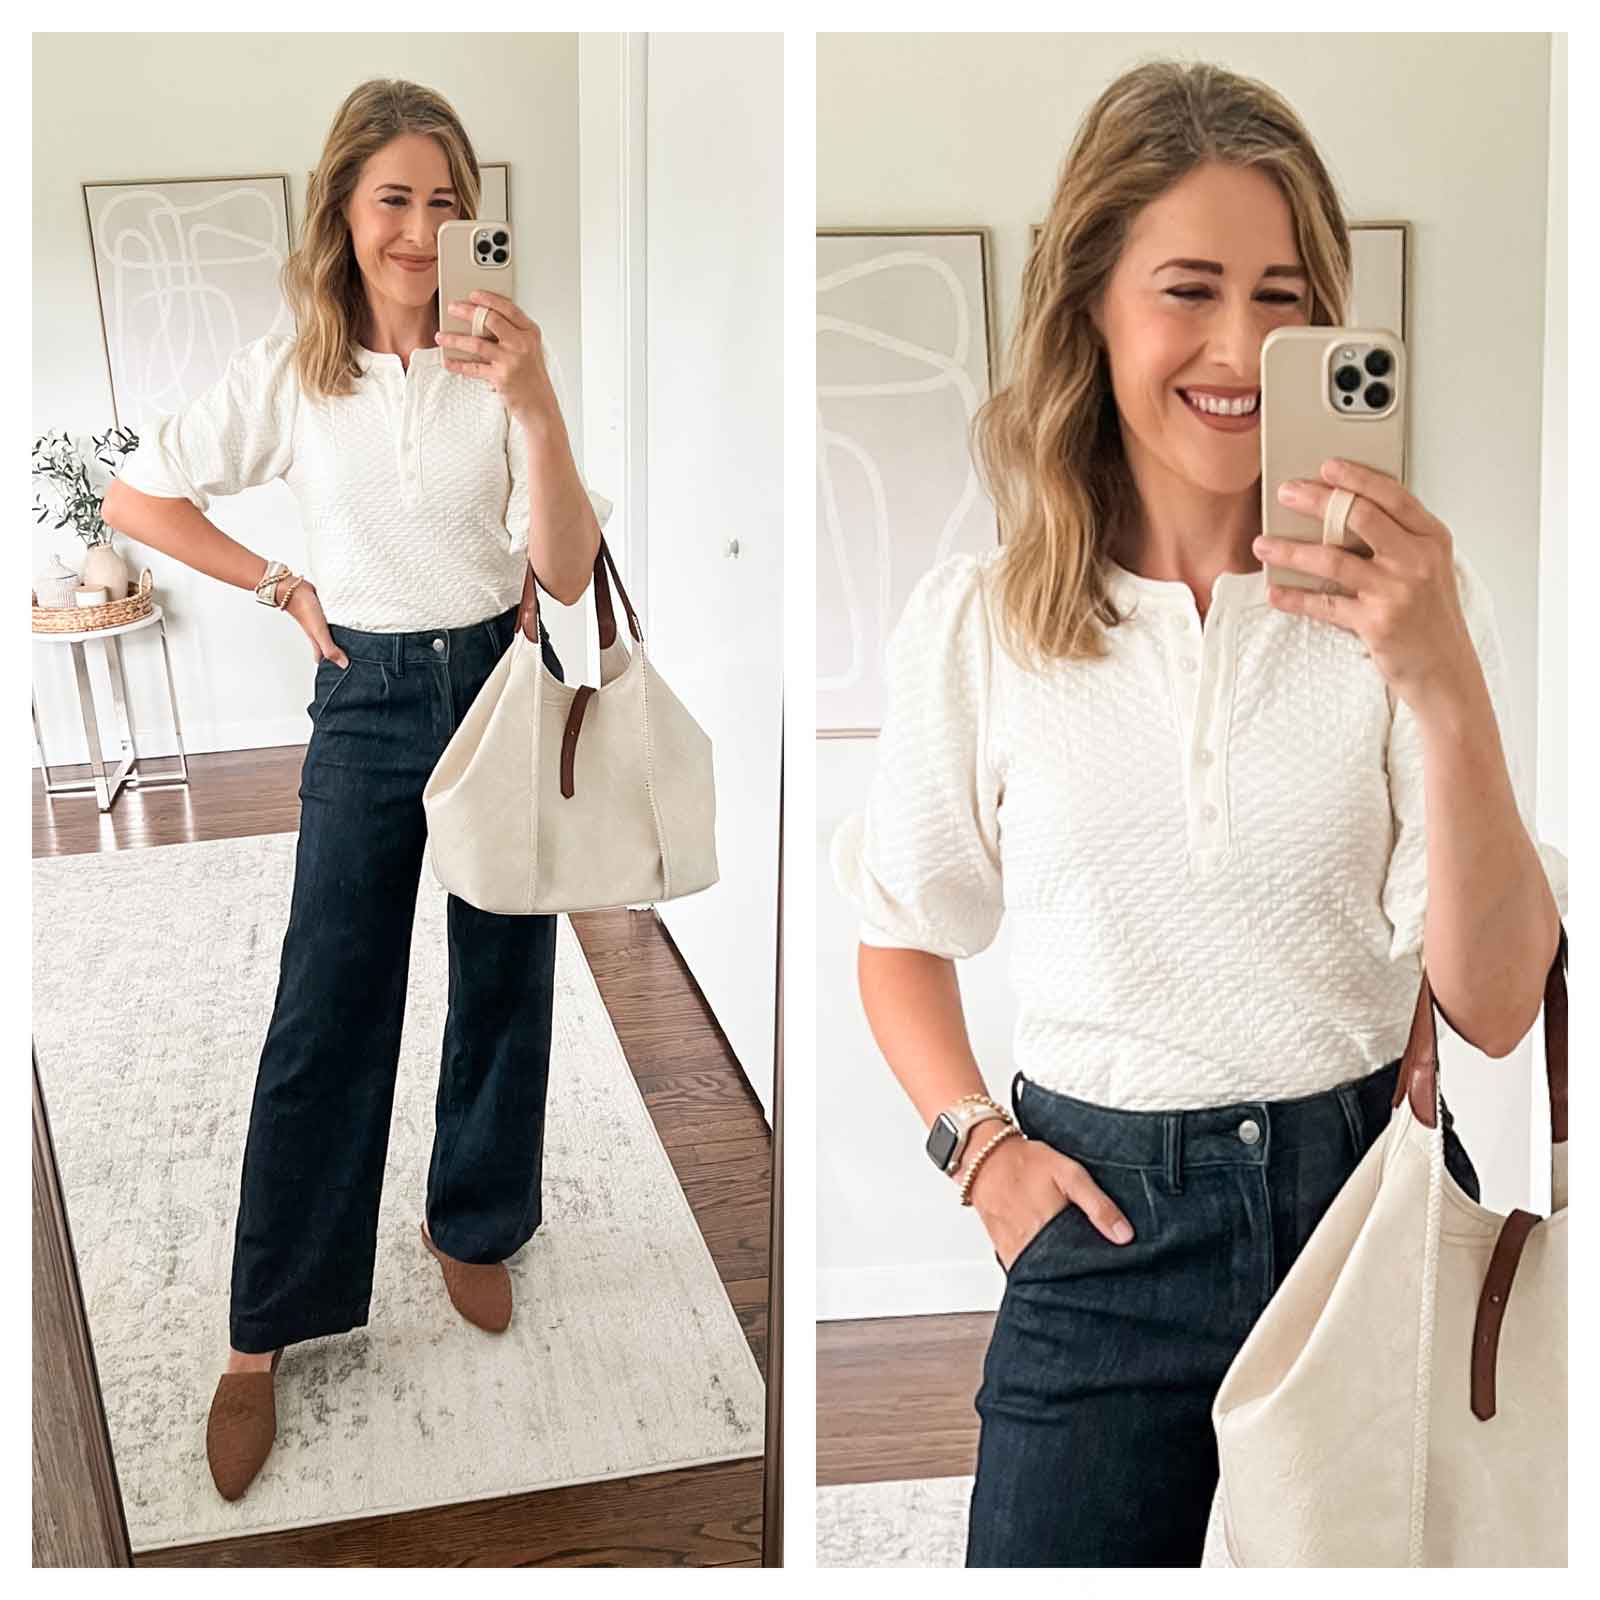 Walmart teacher outfits! Comfy affordable pieces to mix and match for the schoolyear ahead.